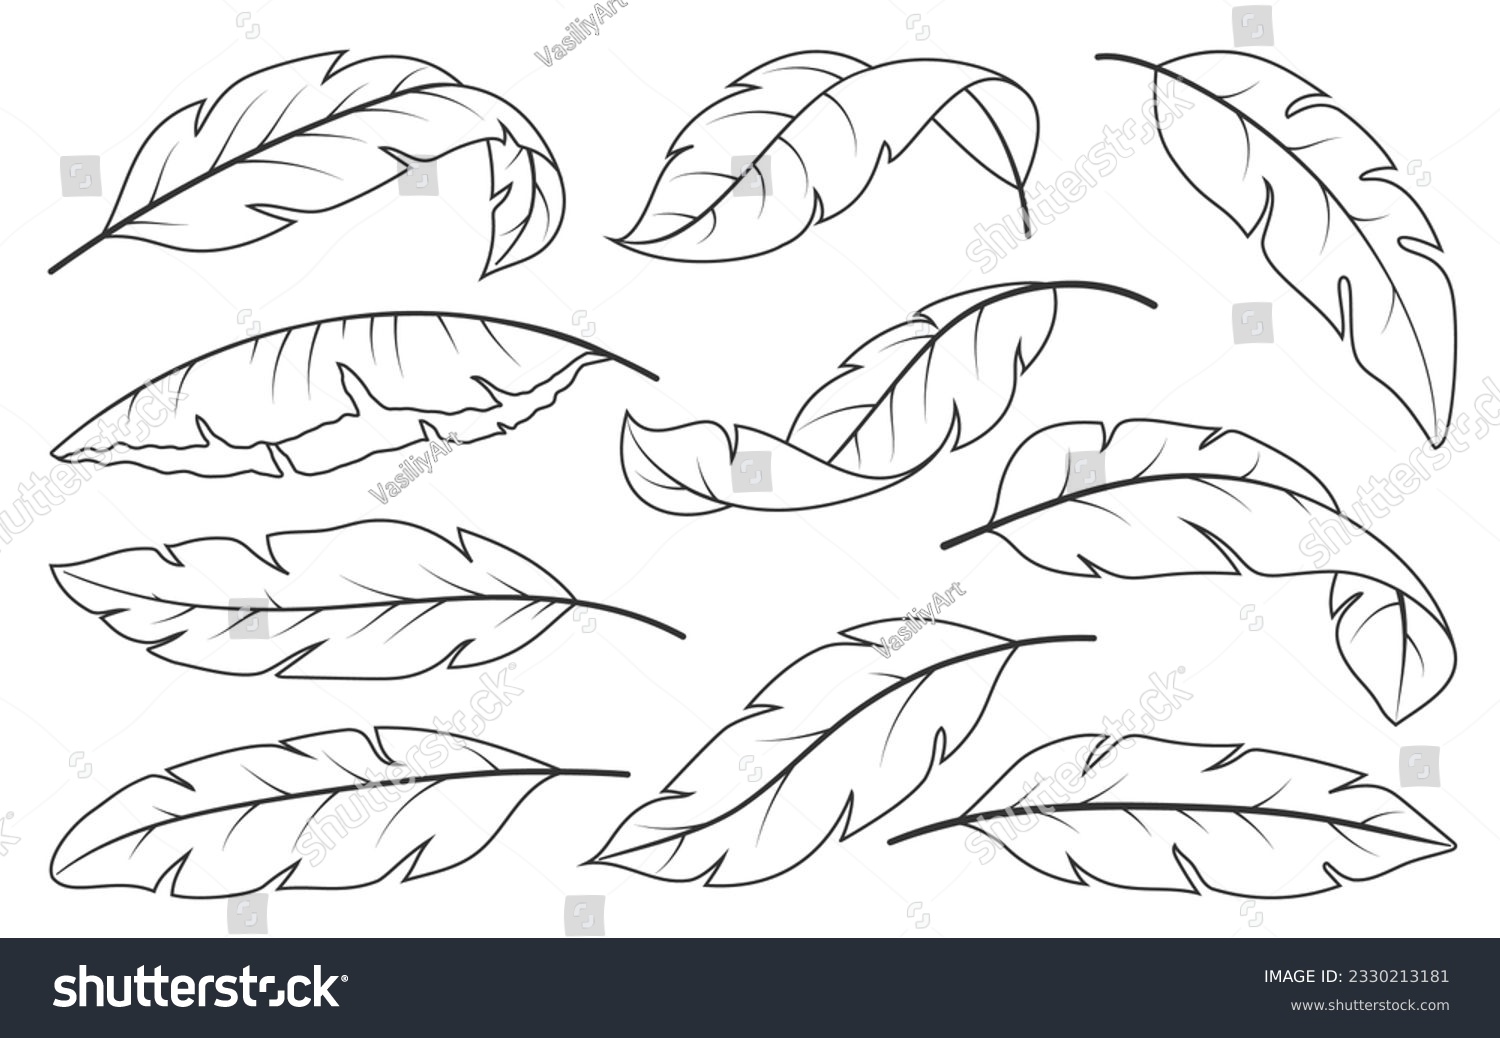 Palm tree coloring page over royalty